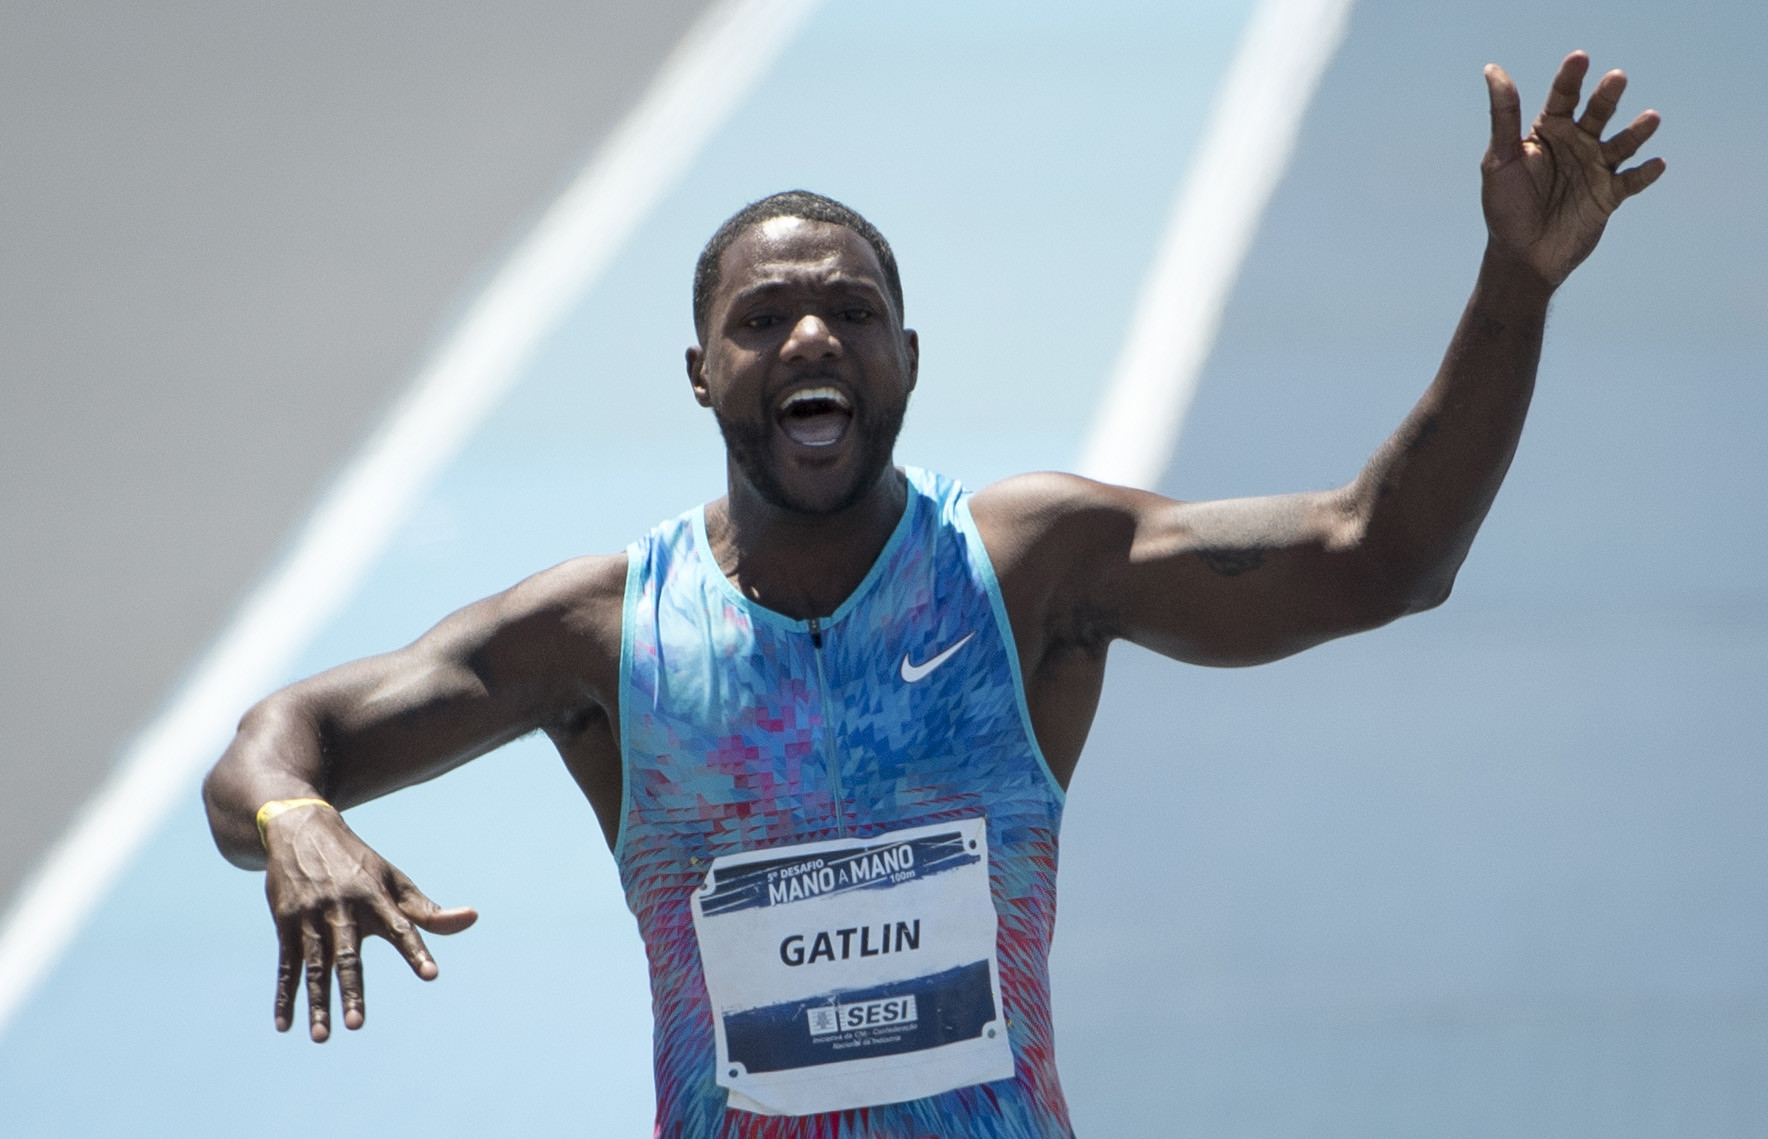 Gatlin fires Olympic champion coach after he "offers to supply performance enhancing drugs"